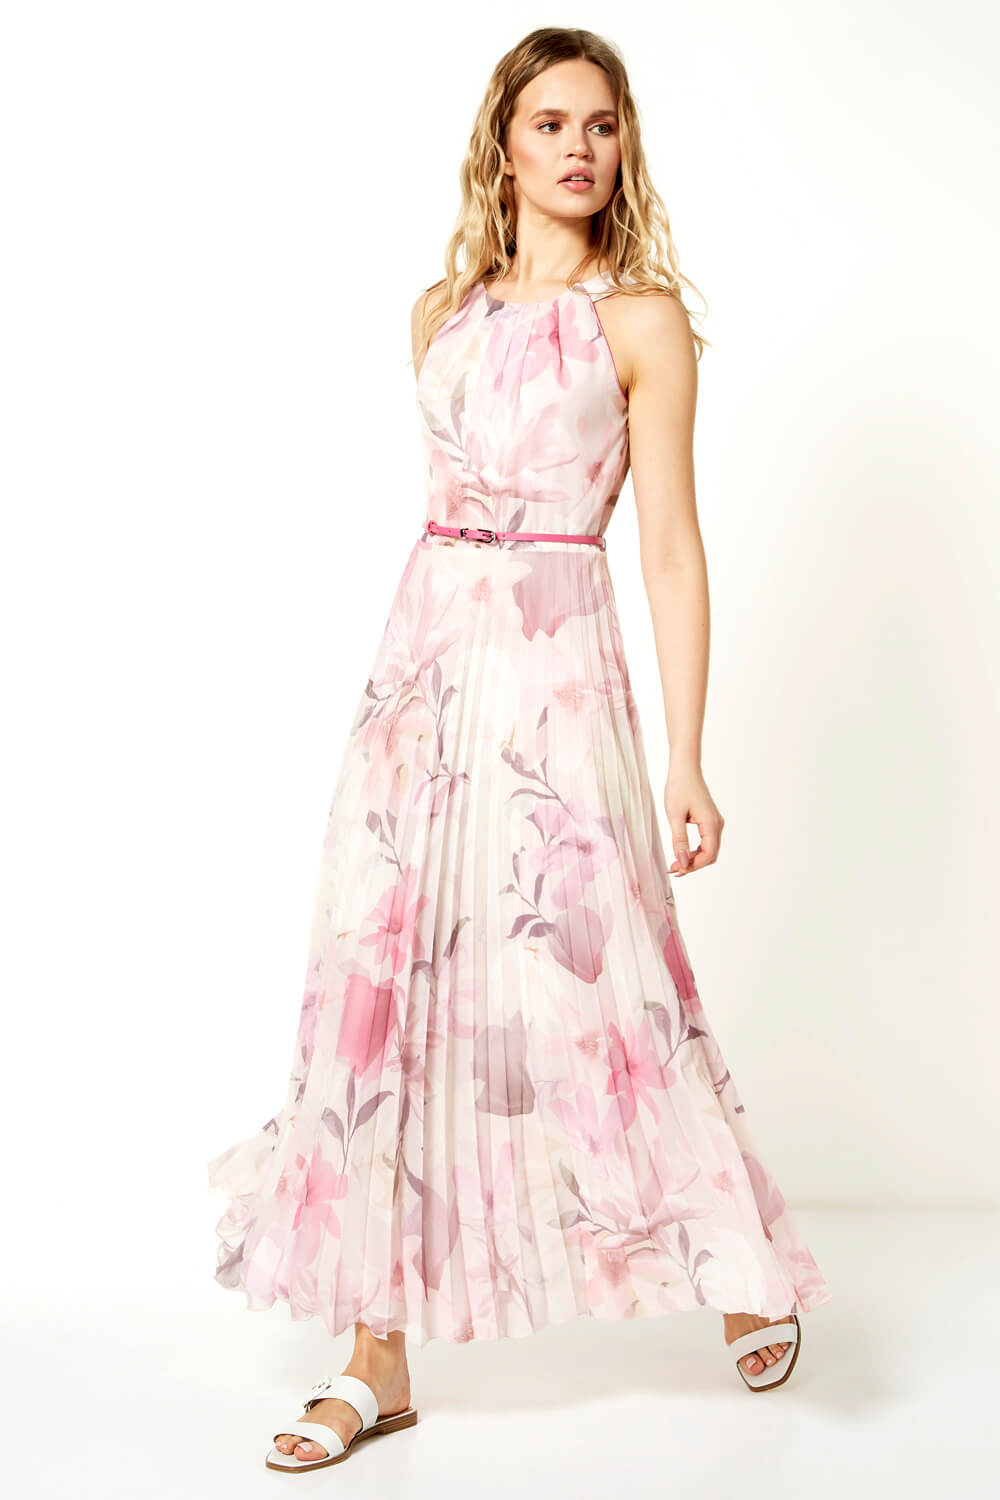 PINK Floral Pleated Maxi Dress, Image 4 of 5